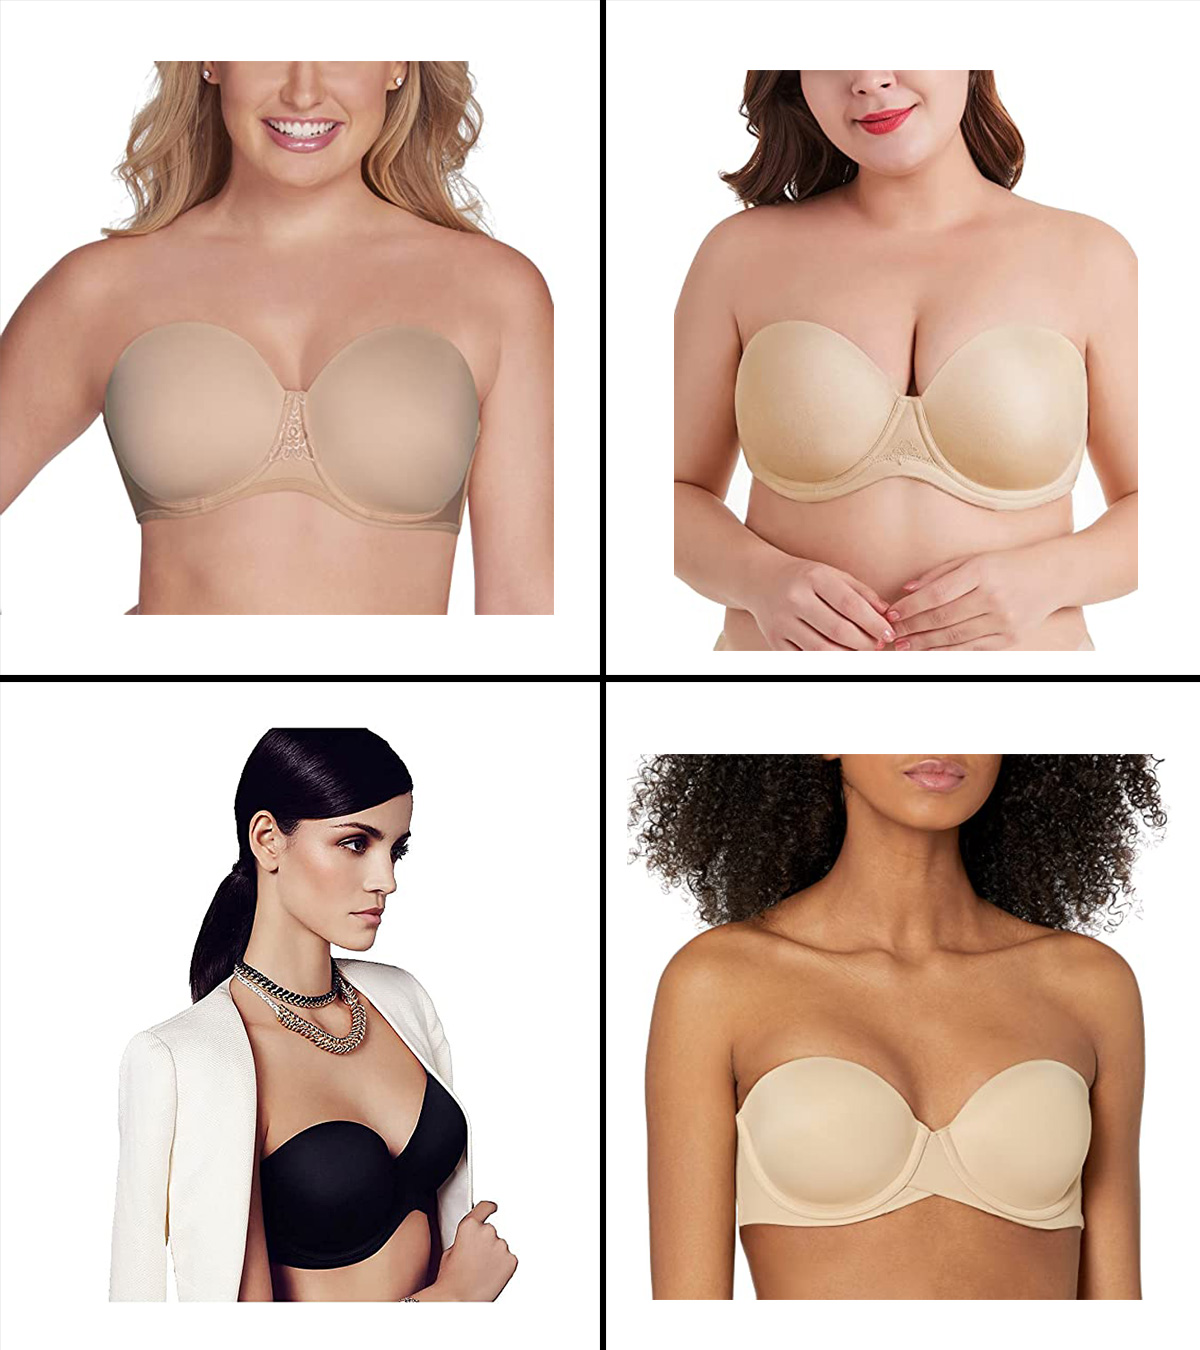 What's the best strapless bra for a G cup? - Quora